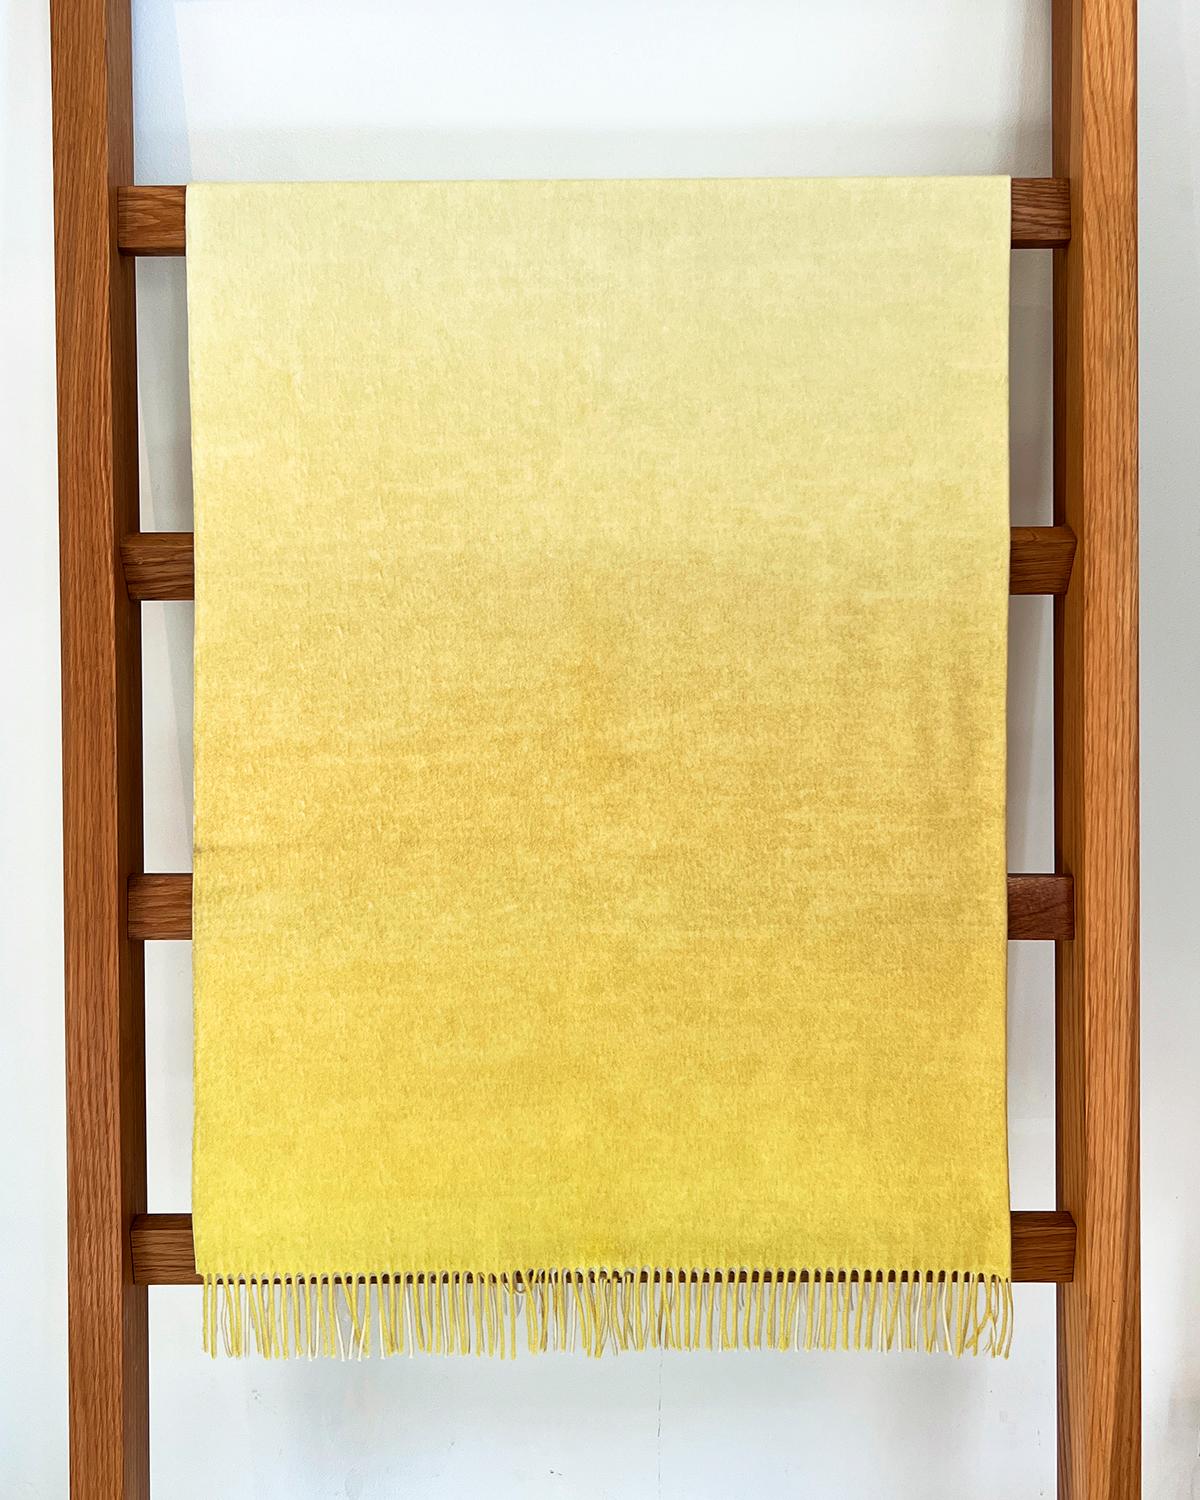 Spanish Ombre Merino Wool Soft Blanket Throw in Yellow, in Stock For Sale